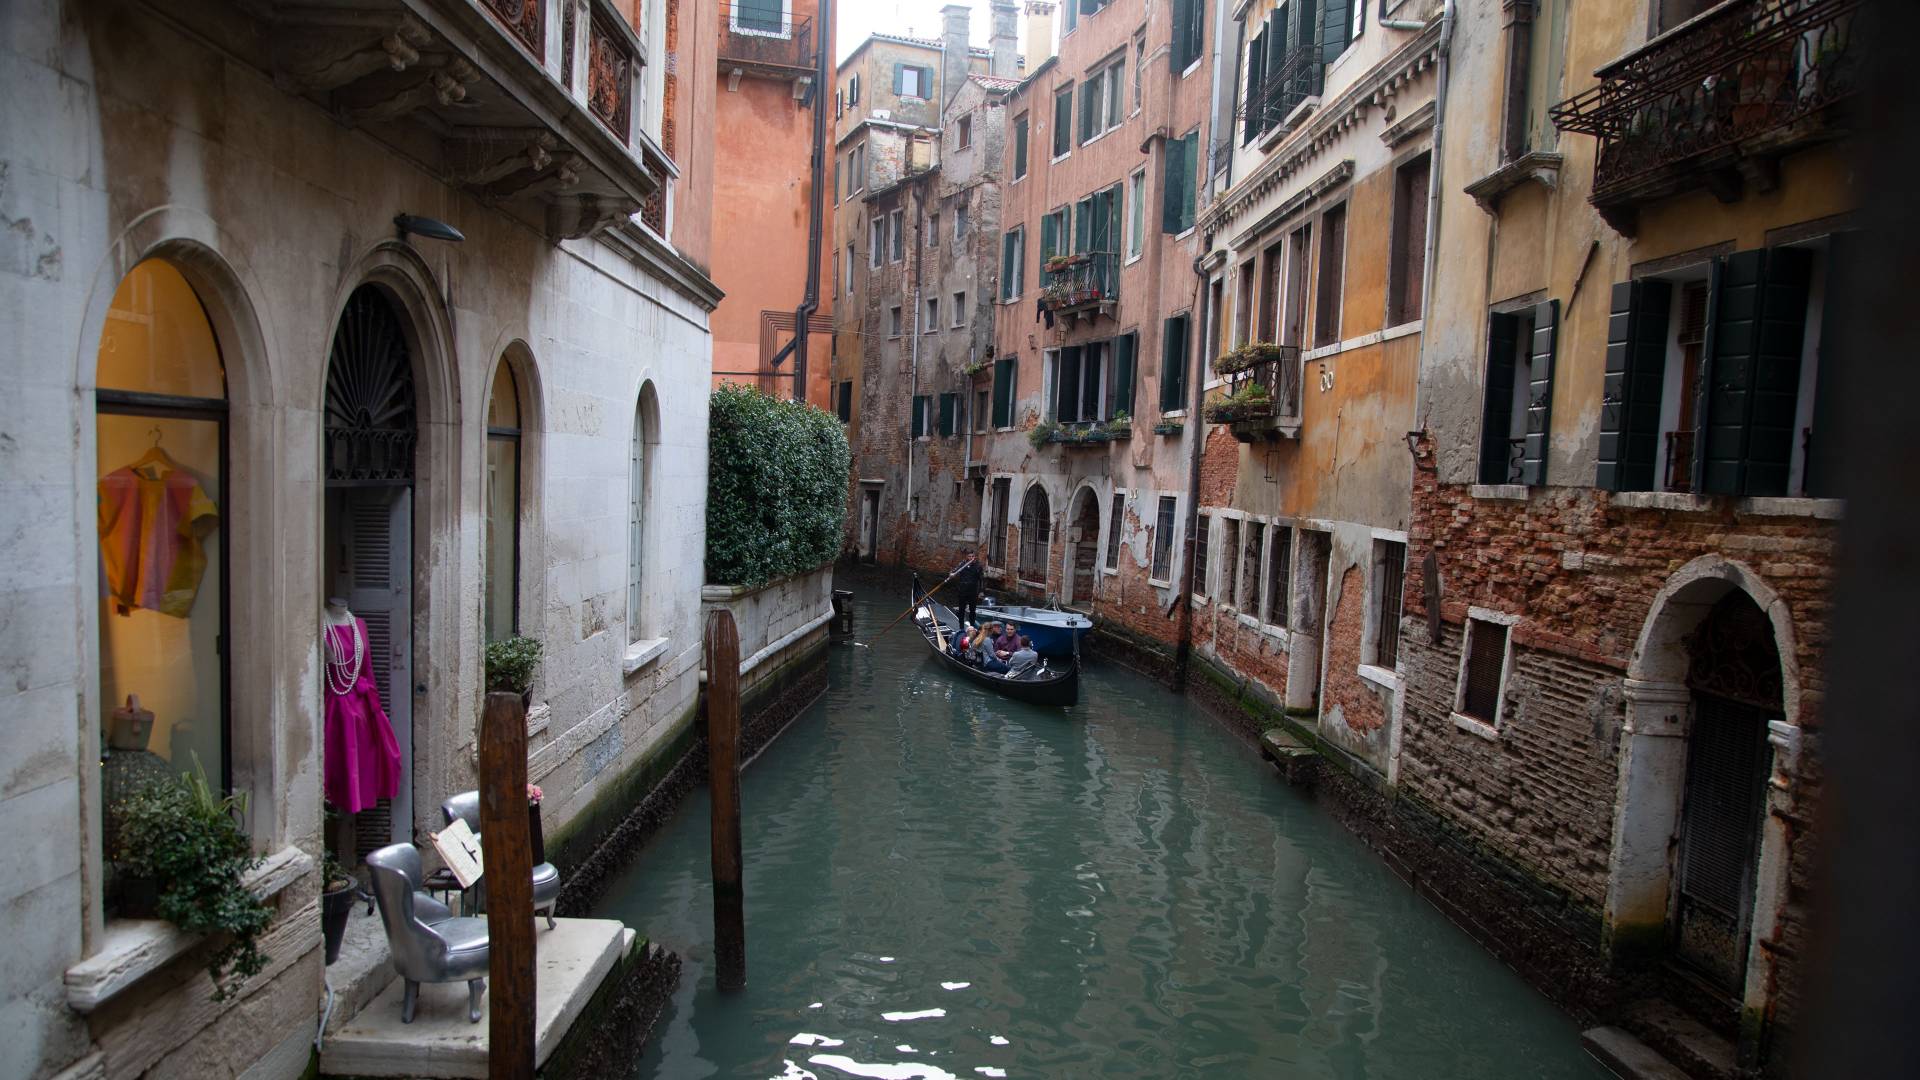 Houses and shops along Venice canal